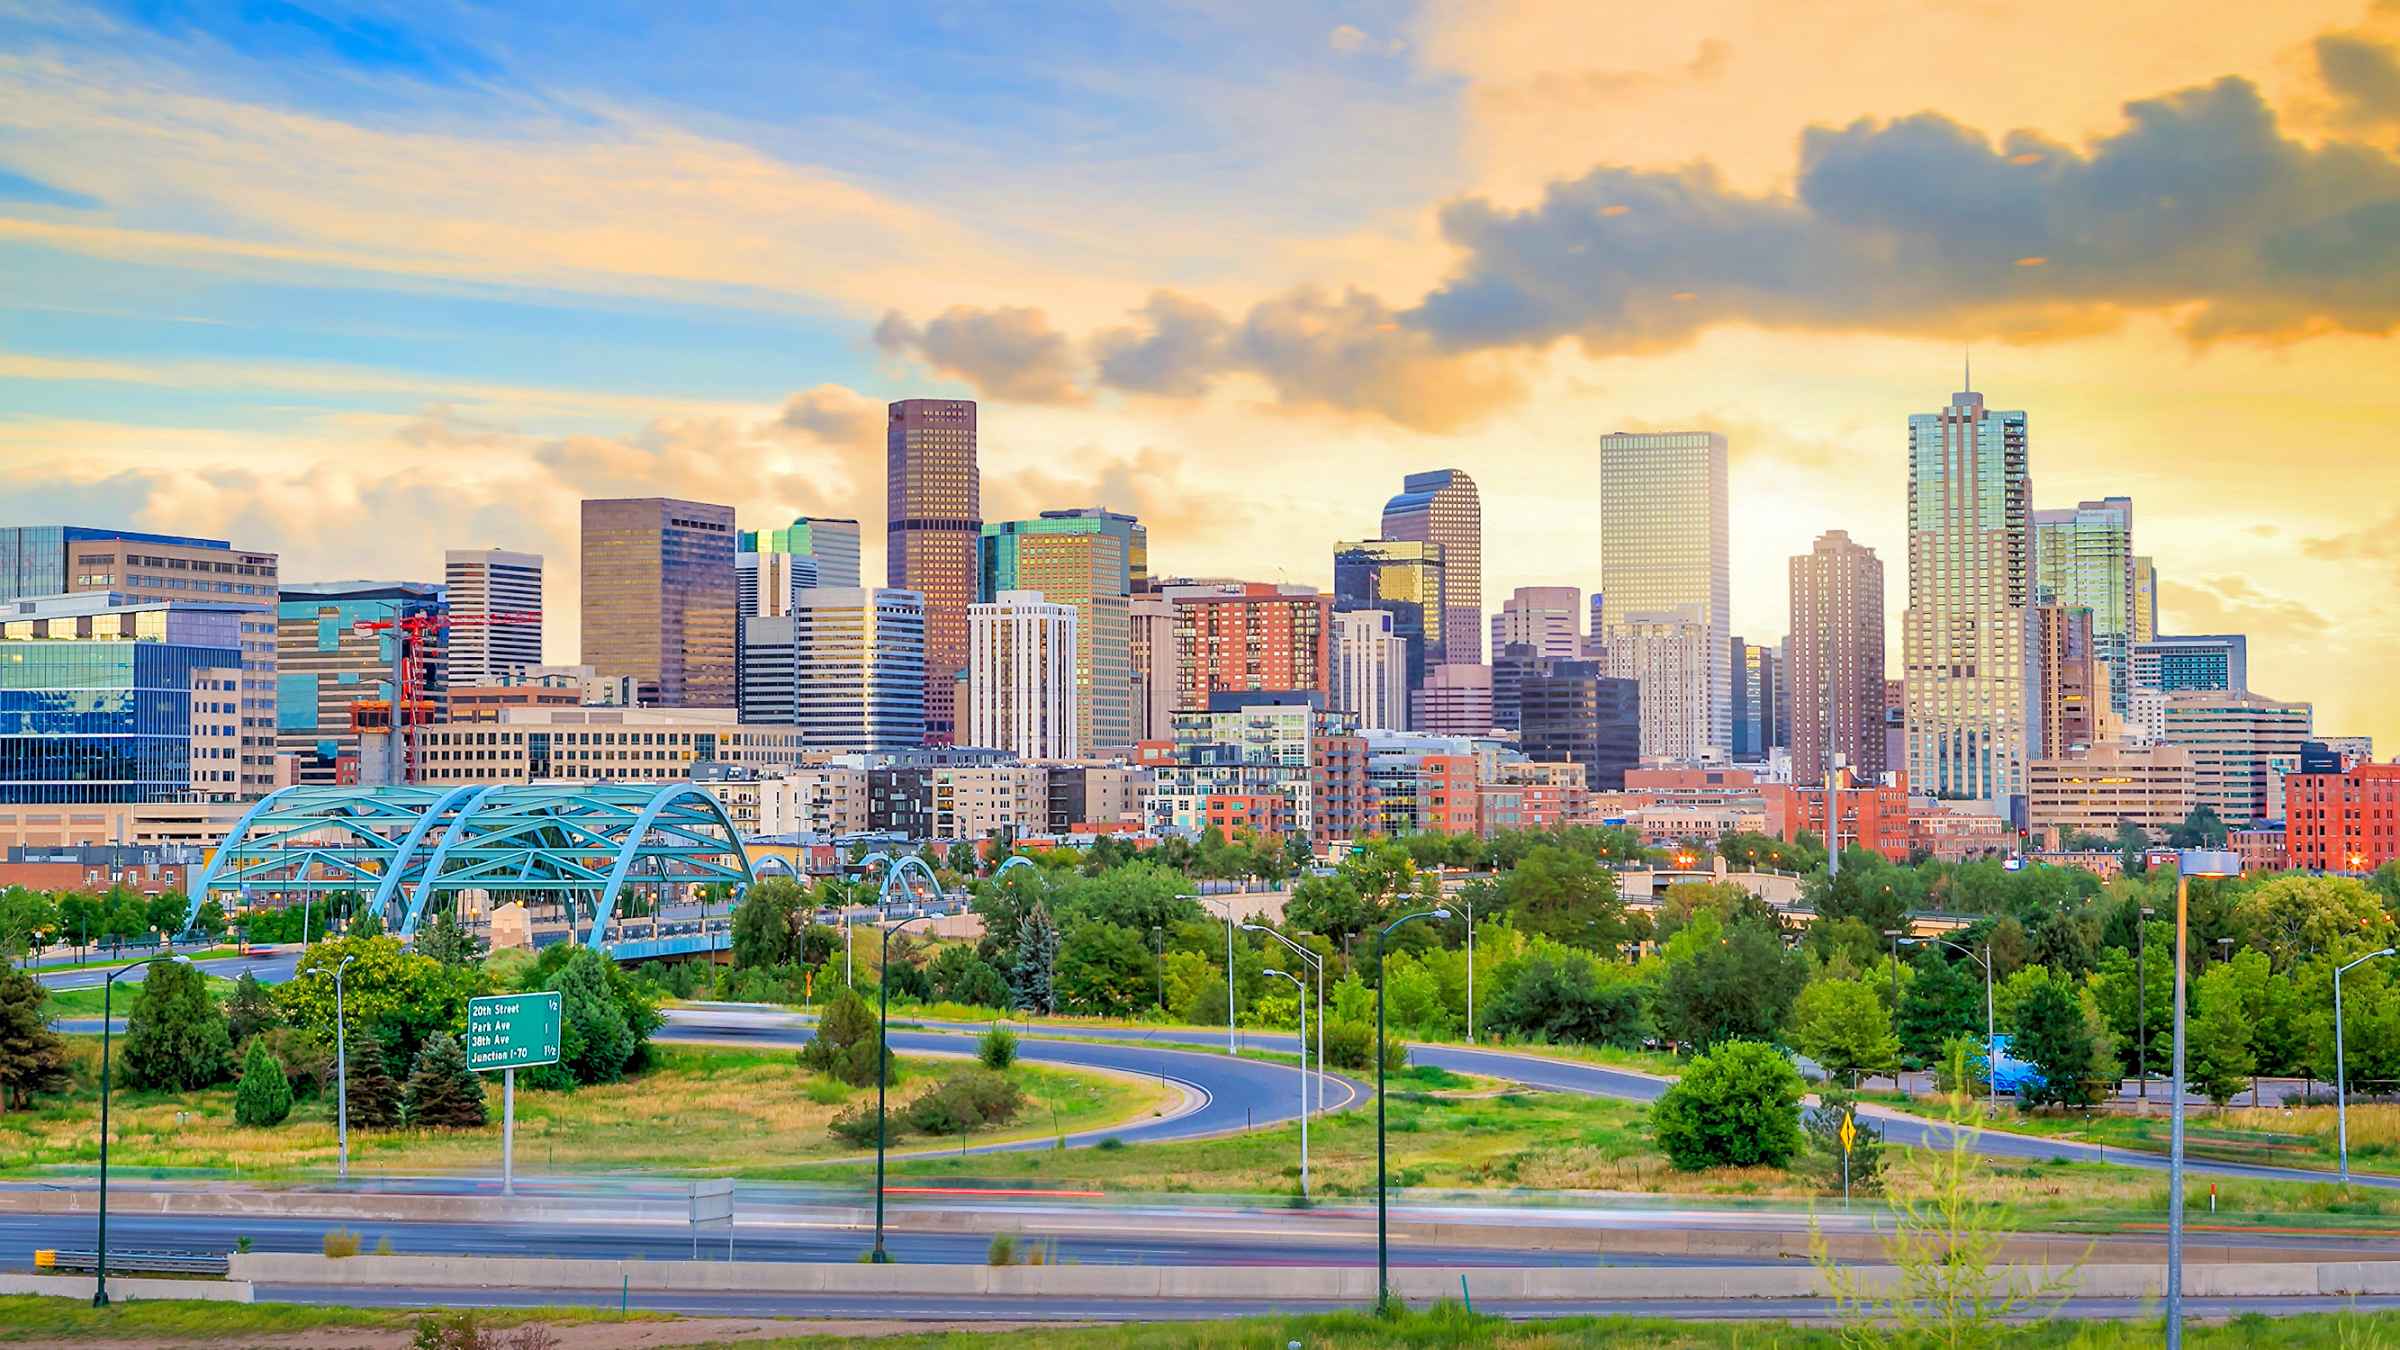 Explore nature and modernity with Denver Tours